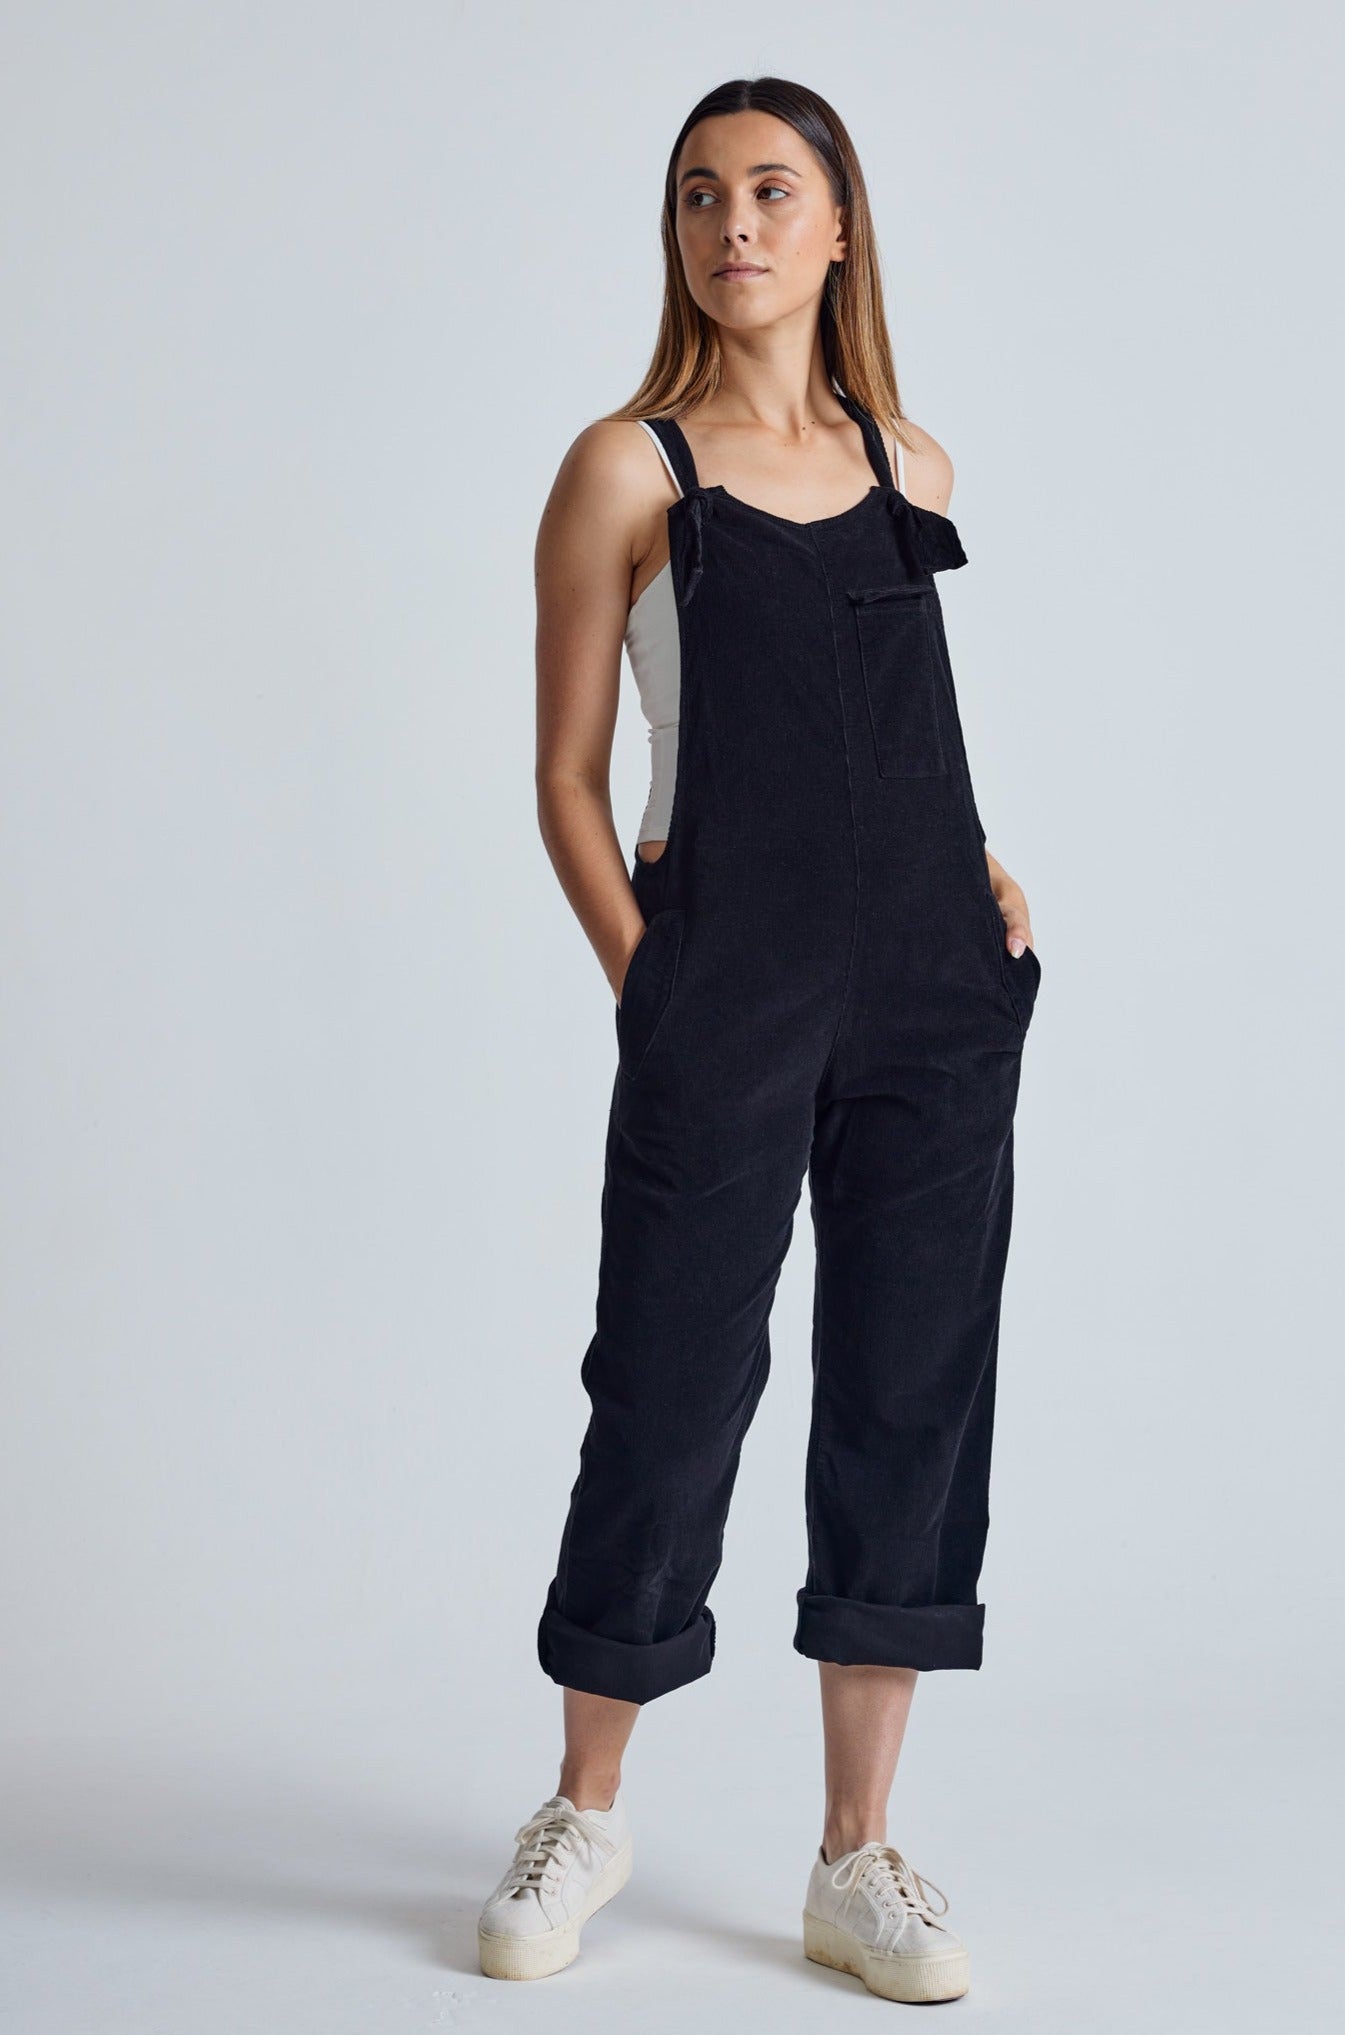 Black Babycord Mary-Lou Pocket Dungaree - GOTS Certified Organic Cotton and Elastane